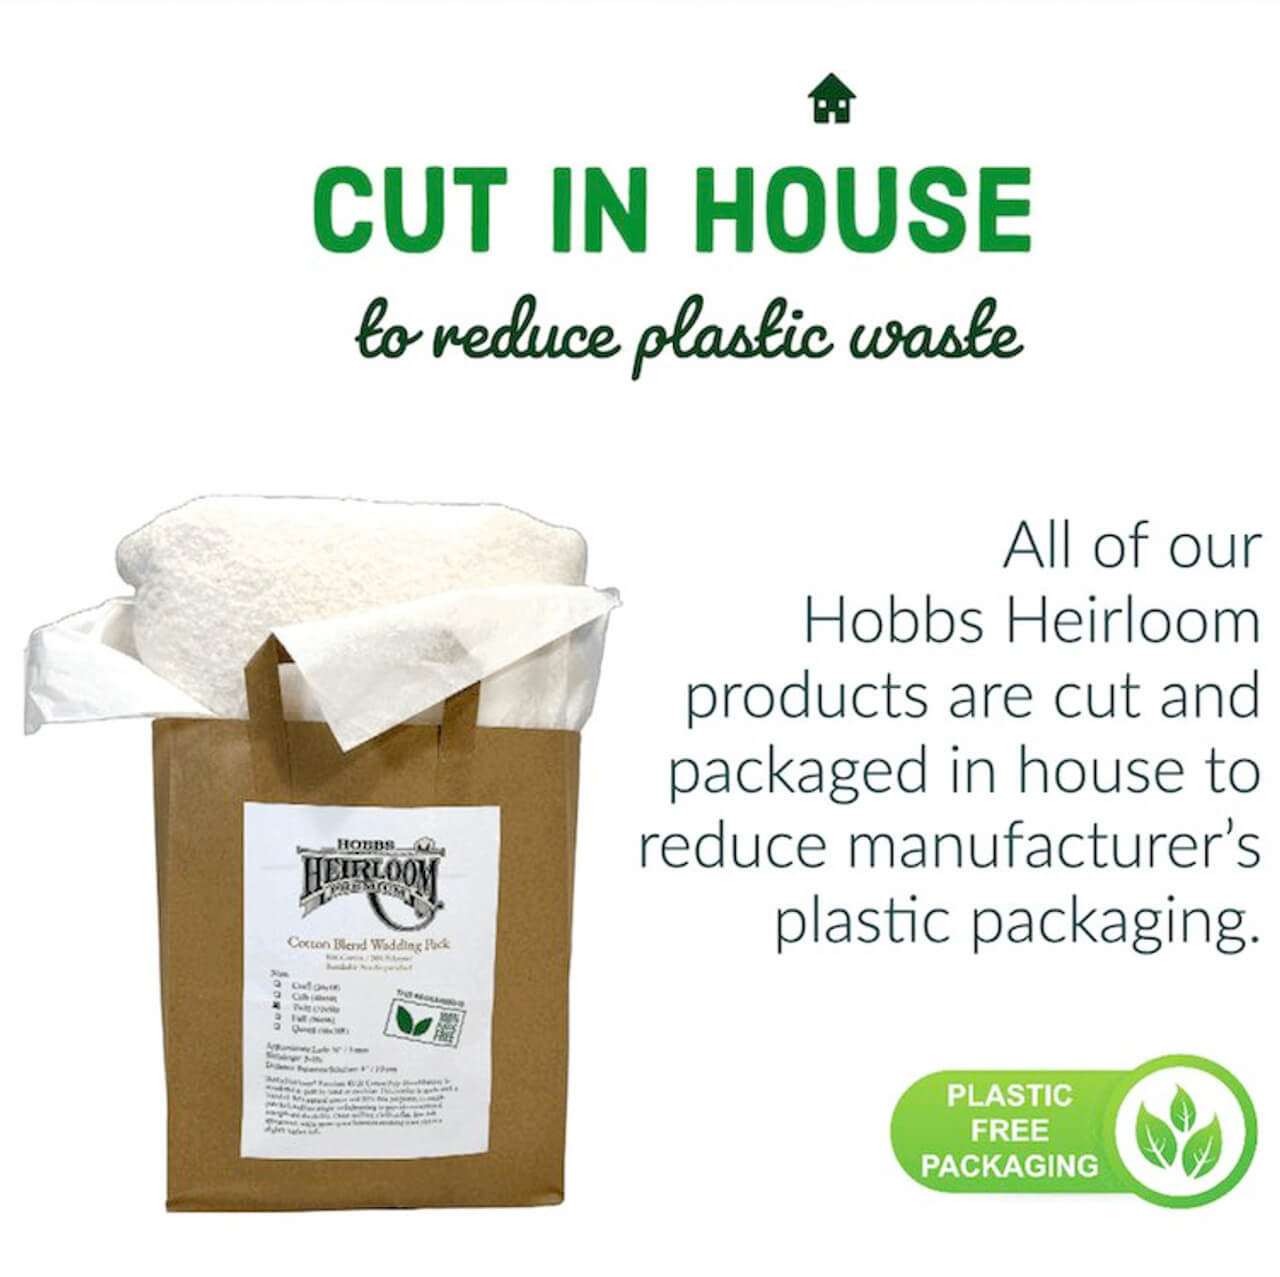 Image for Hobbs Heirloom quilting products featuring our eco-friendly initiative. The image shows a brown paper package with quilting wadding exposed at the top. Above the package, text states "CUT IN HOUSE to reduce plastic waste." Additional text emphasizes that all Hobbs Heirloom products are cut and packaged in-house to reduce the manufacturer's plastic packaging, underscored by a "PLASTIC FREE PACKAGING" logo with green leaves, indicating a commitment to environmental sustainability.